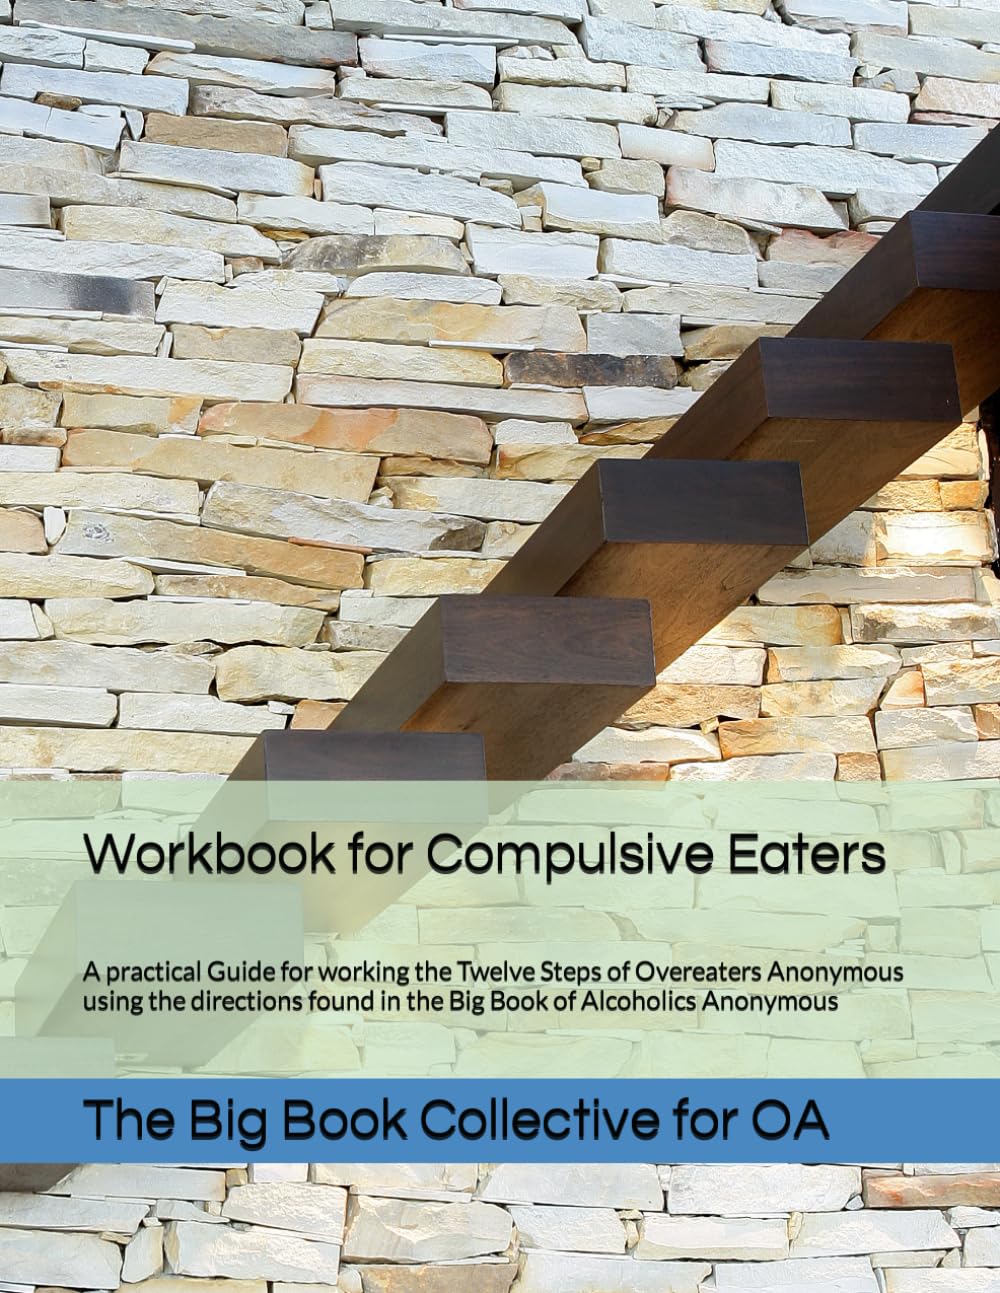 Big Book Workbook for OA Members: A Guide for working the Twelve Steps of Overeaters Anonymous using the directions found in the Big Book of Alcoholics Anonymous